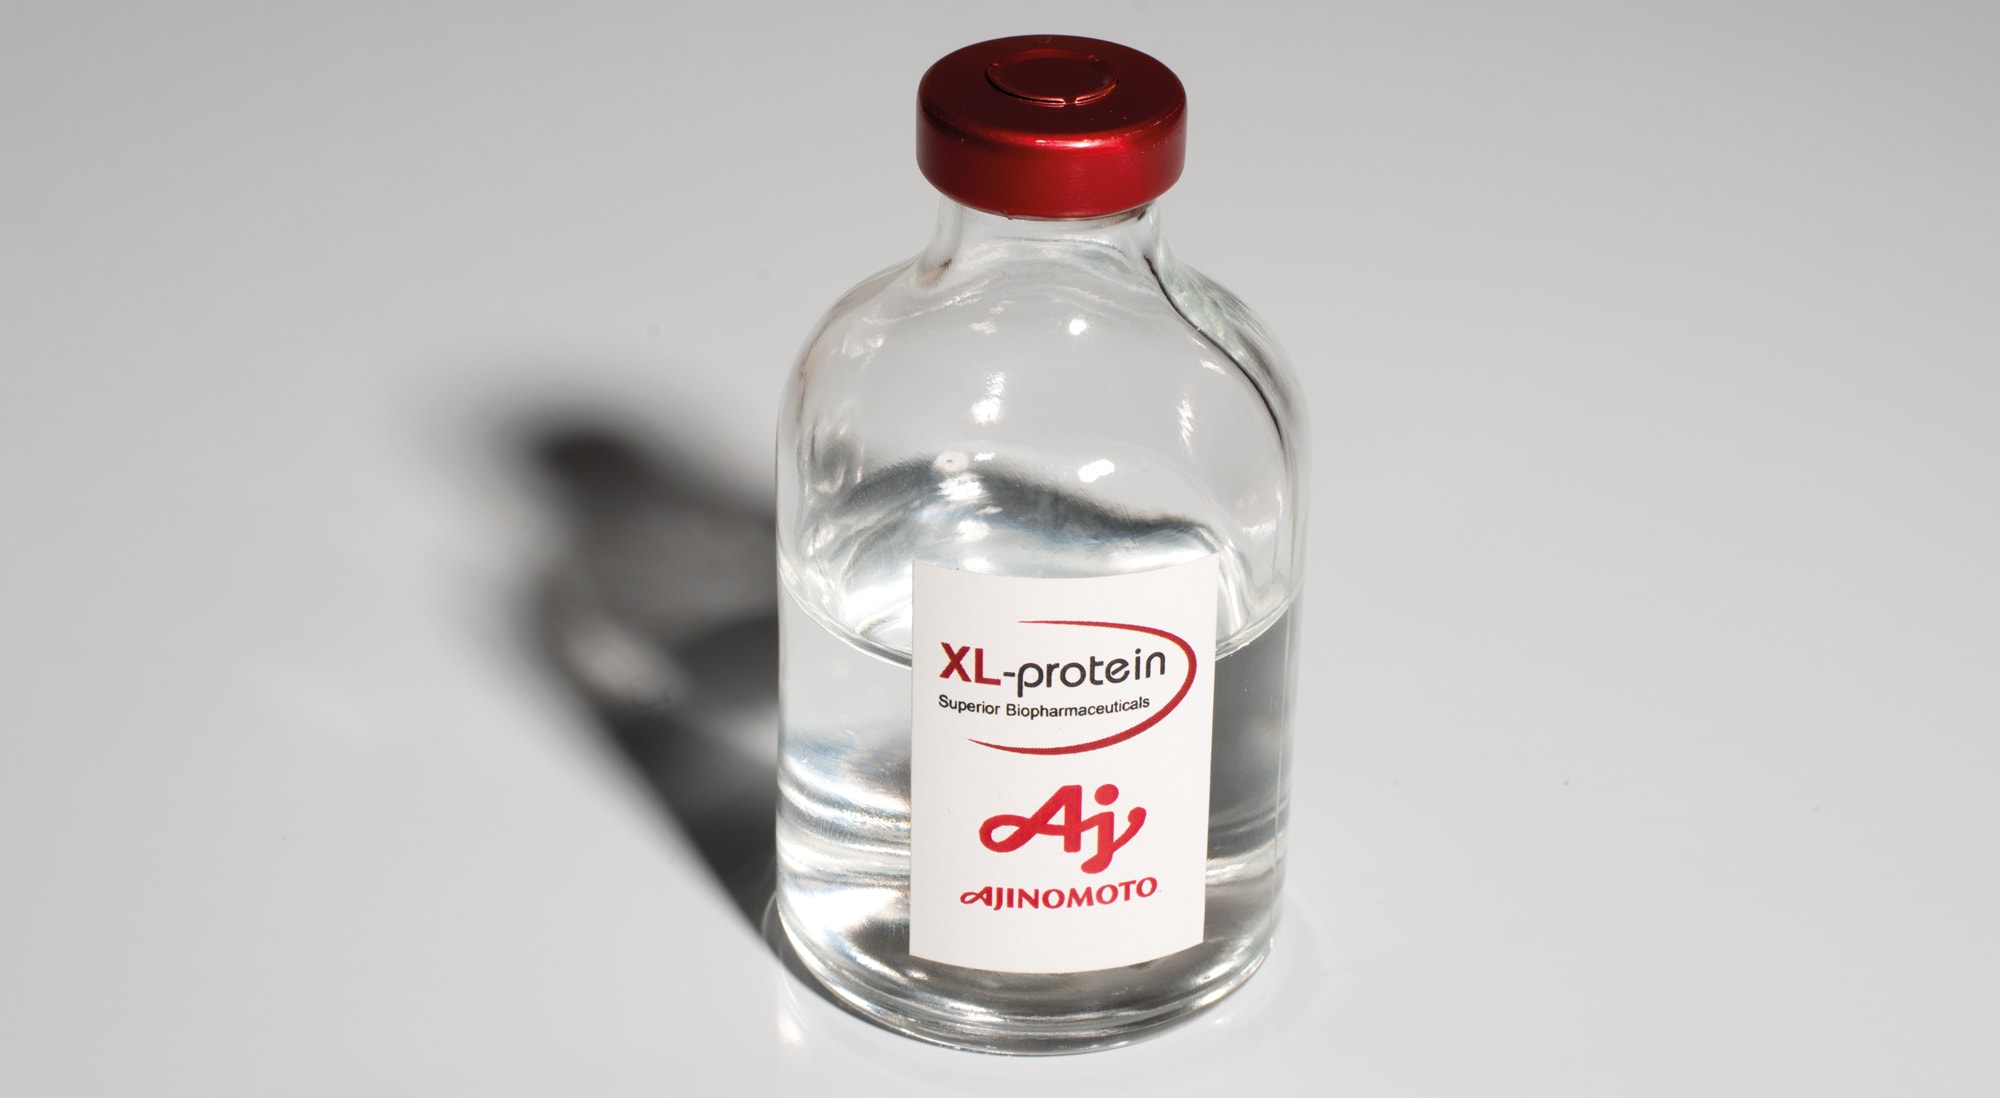 Ampoule-with-liquid-label-of-XL-protein-and-Ajinomoto